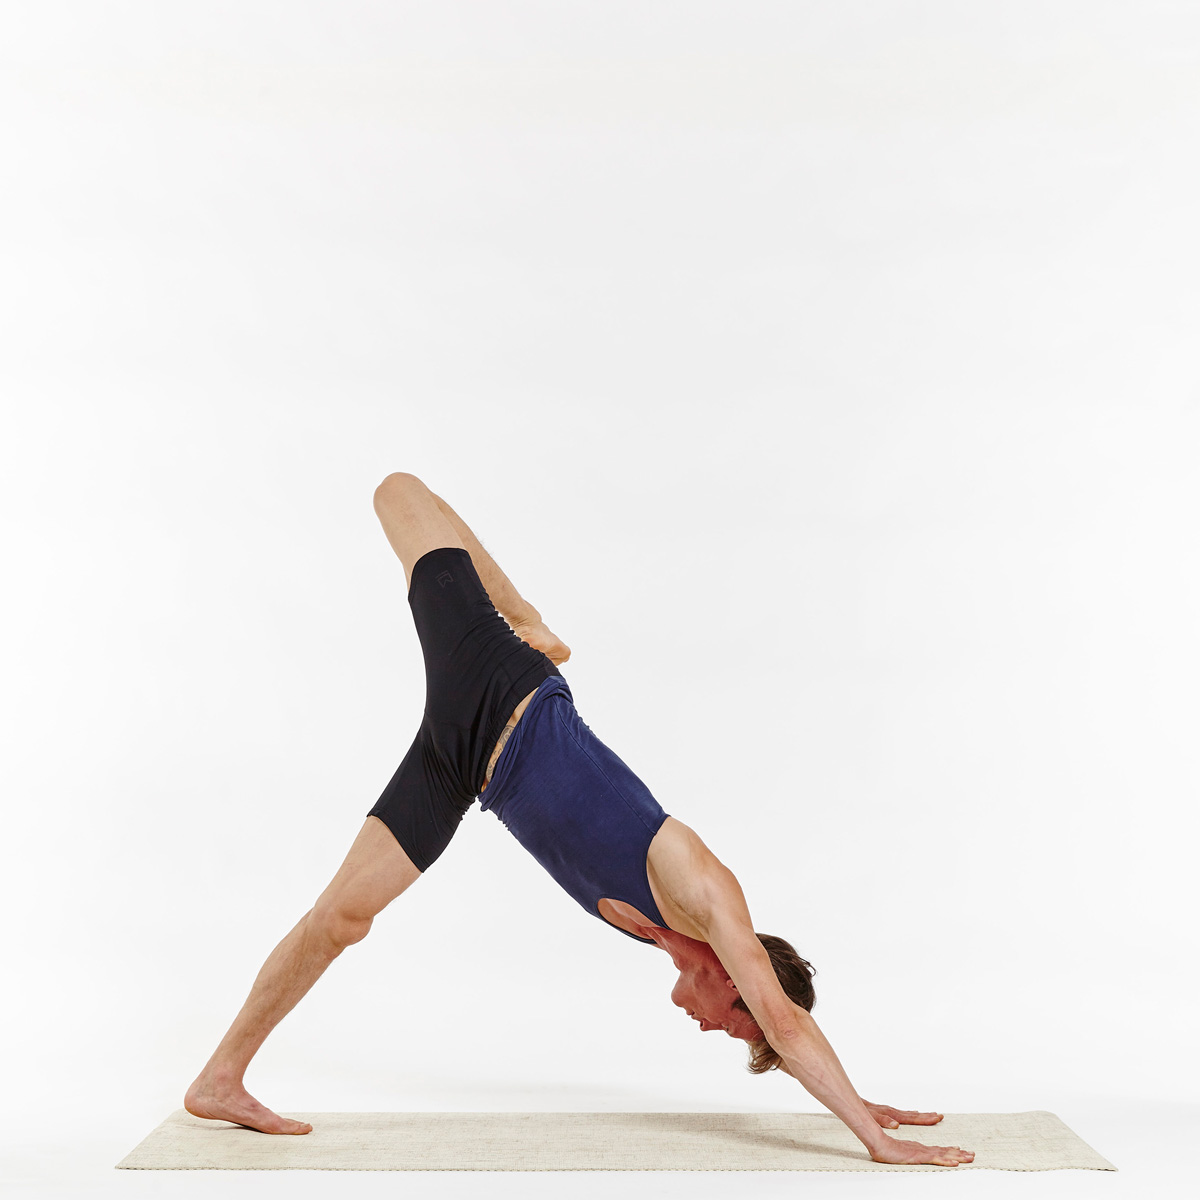 What are the benefits of downward facing dog pose? - Quora